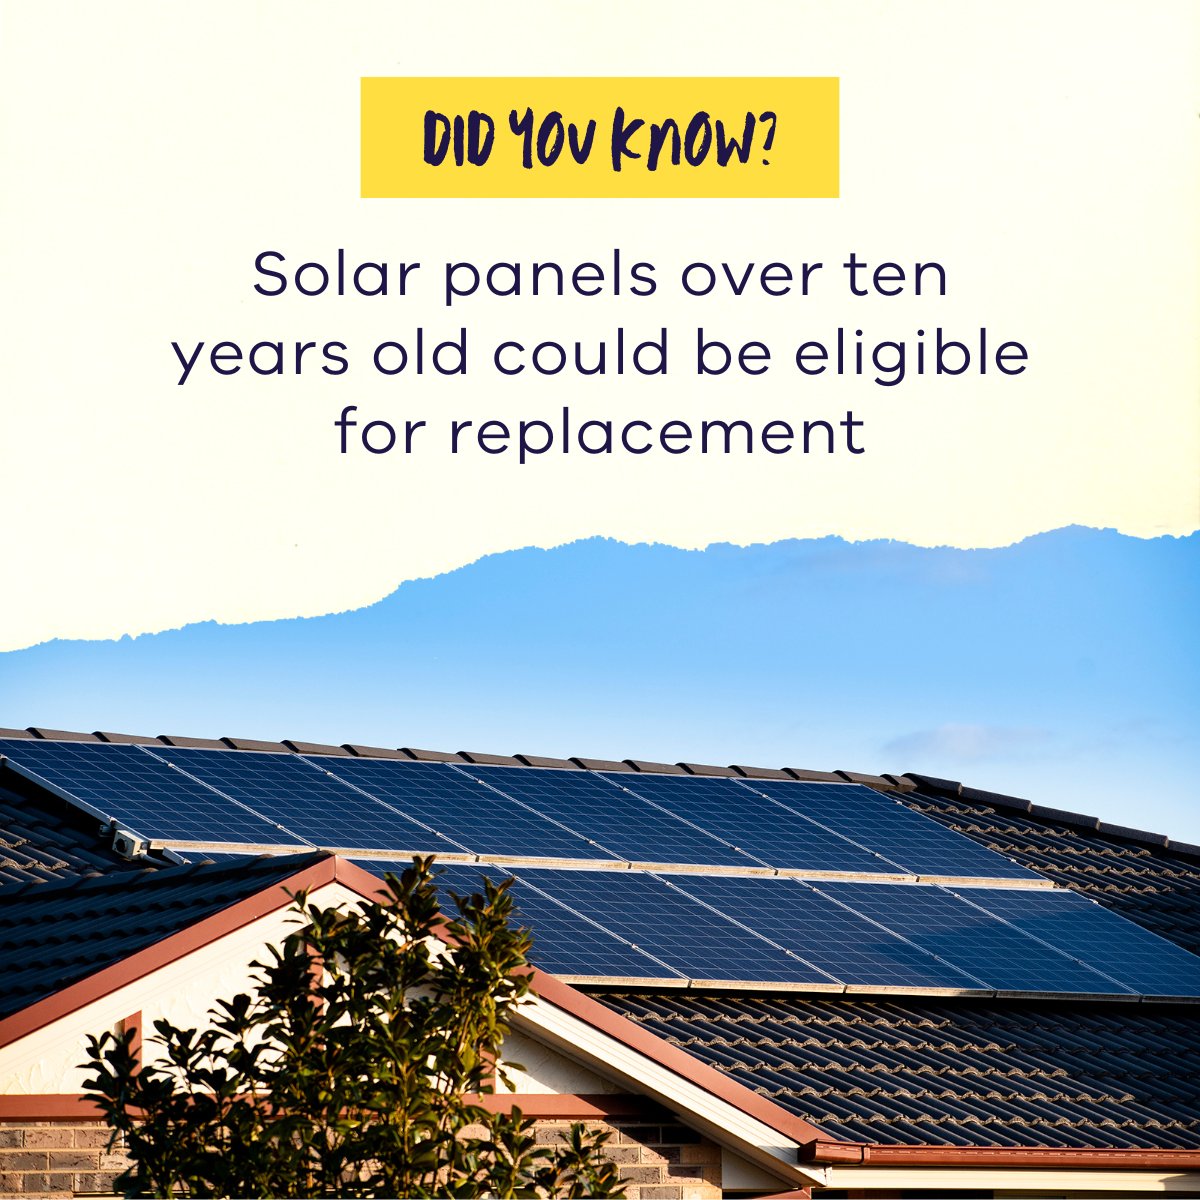 🙌 Did you know? If your current solar panels are over ten years old, you might be eligible to apply for a rebate to replace or add new solar panels. Find out if you're eligible for a $1,400 rebate plus the option of an interest-free loan: solar.vic.gov.au/solar-panel-re…